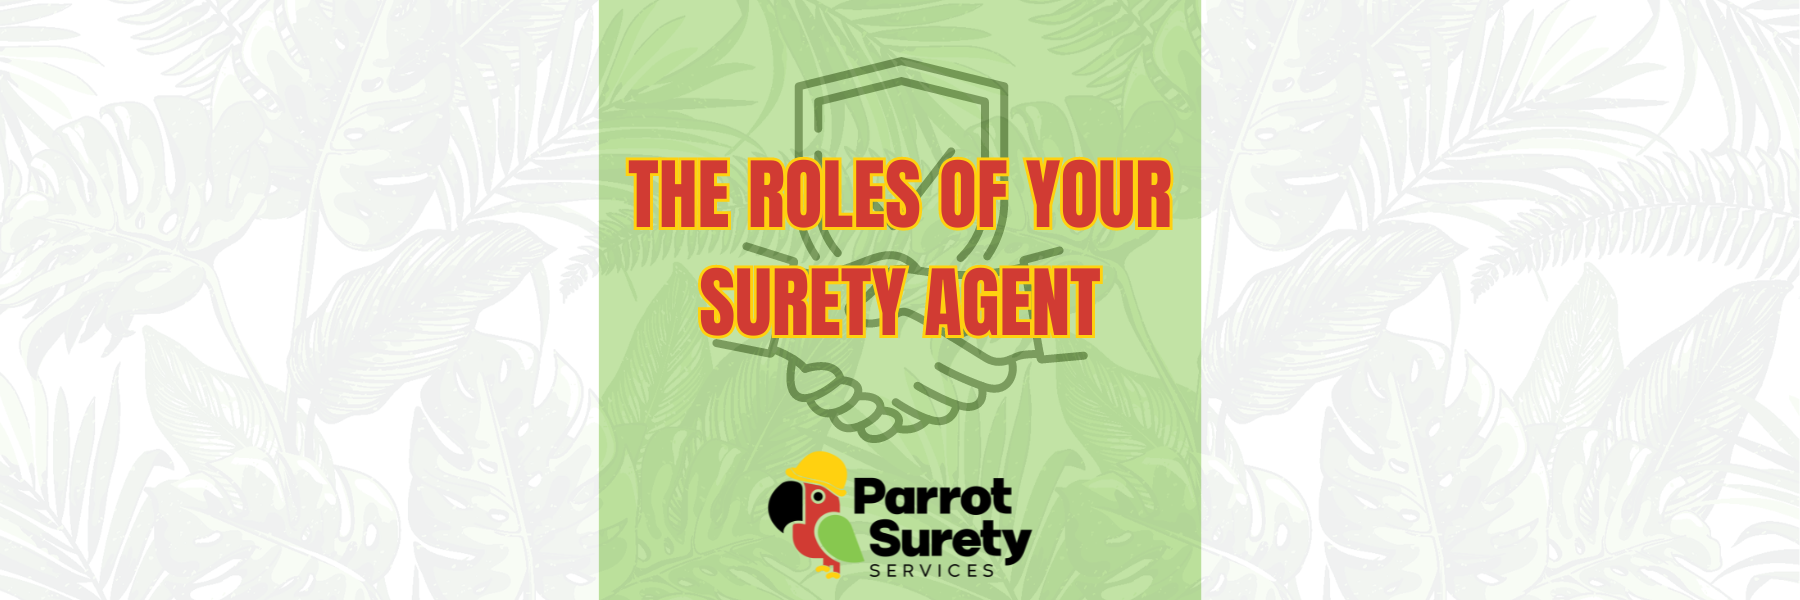 the roles of your surety agent title image